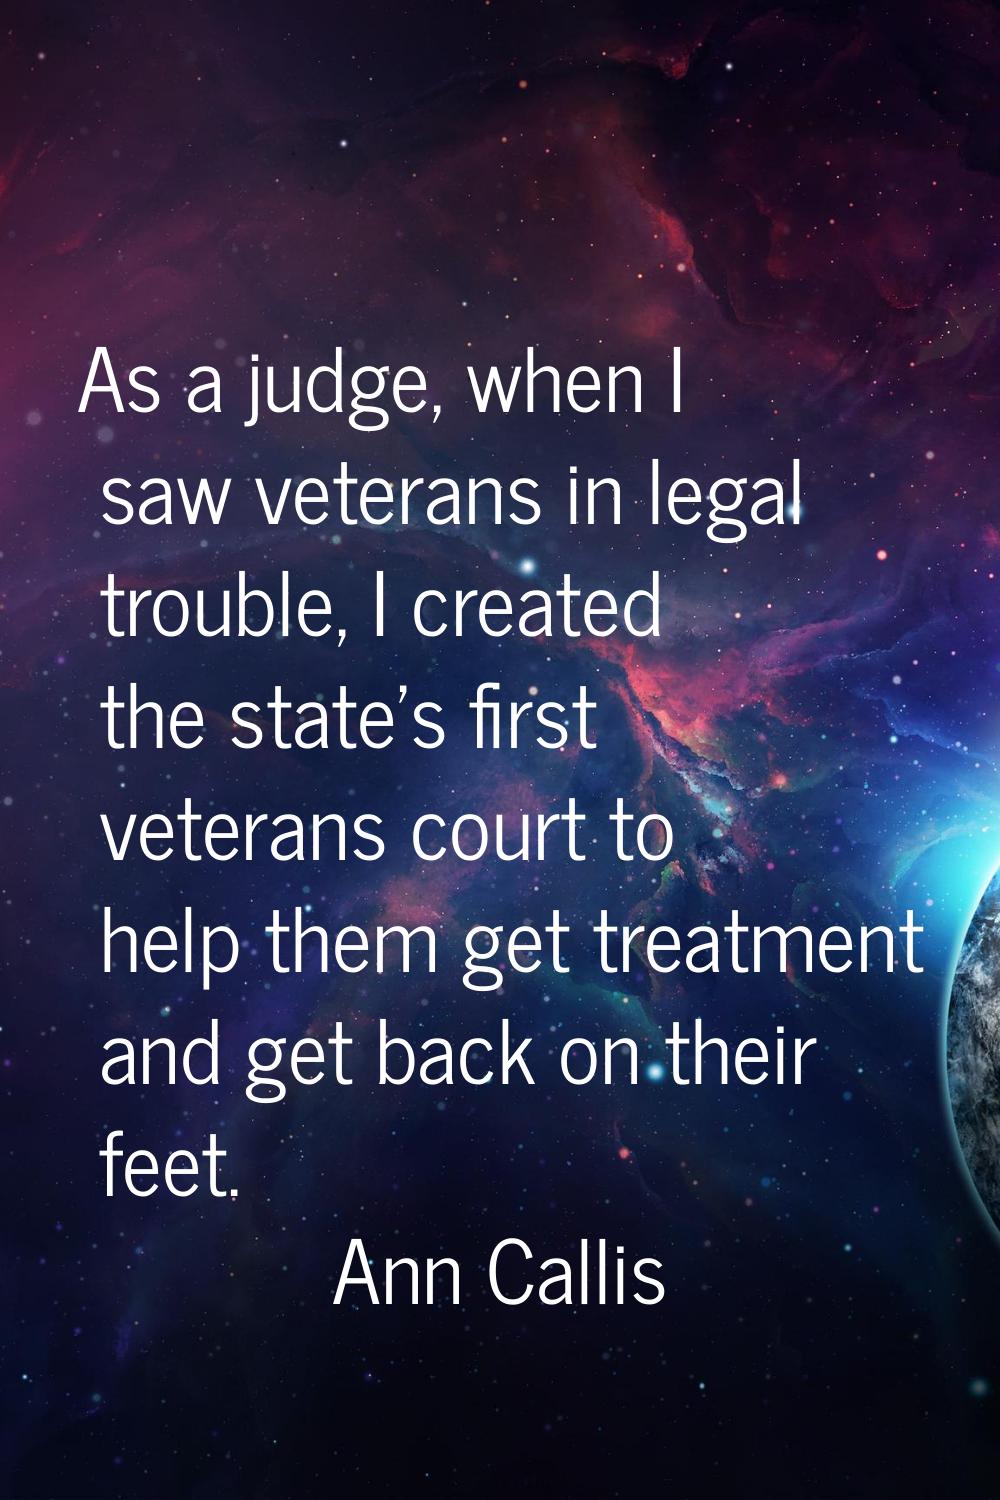 As a judge, when I saw veterans in legal trouble, I created the state's first veterans court to hel